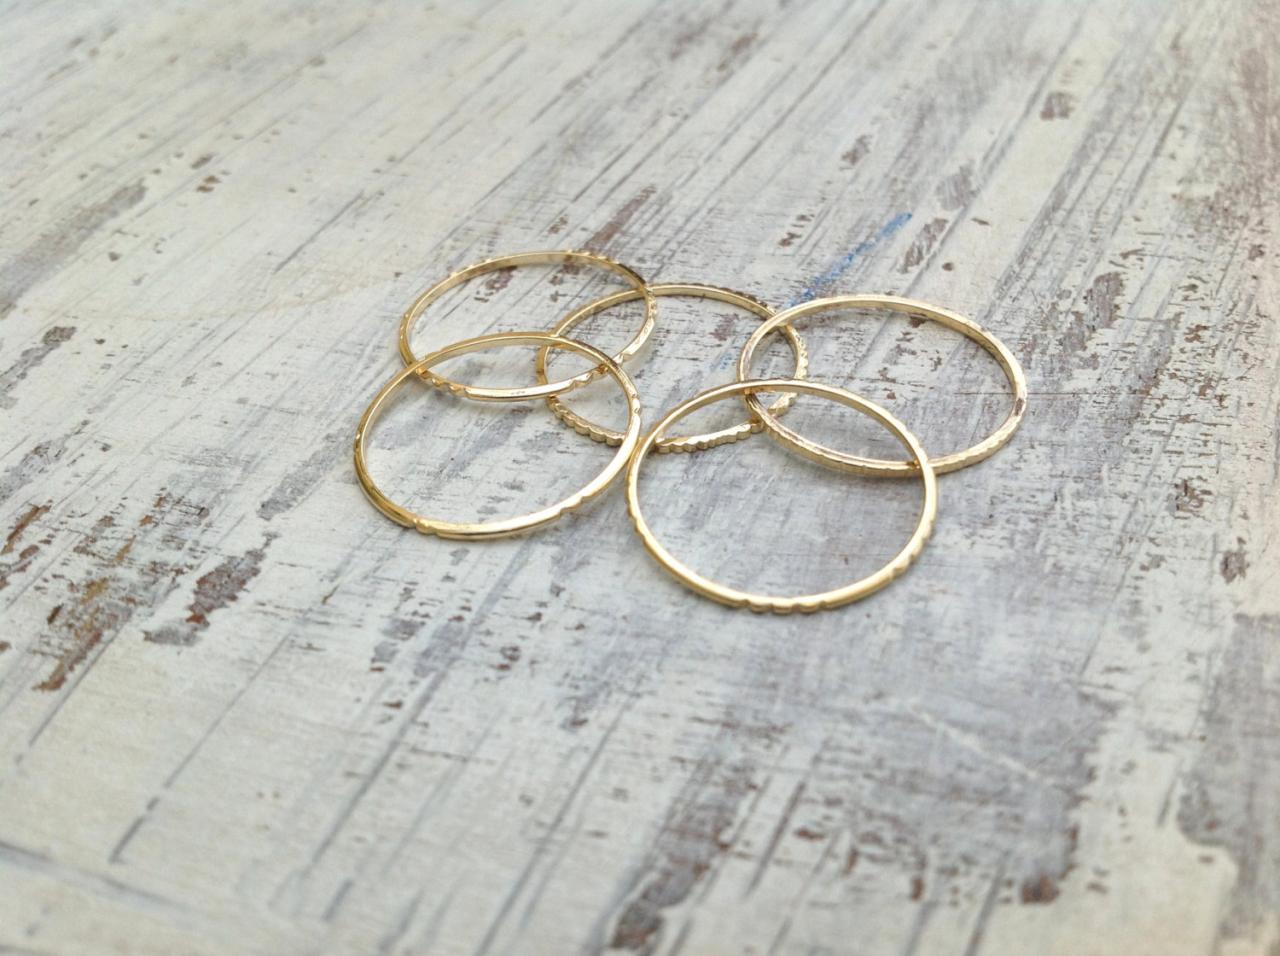 5 Gold rings, Stacking ring, stacking gold rings, knuckle rings, thin ring, hammered ring, tiny ring RR2